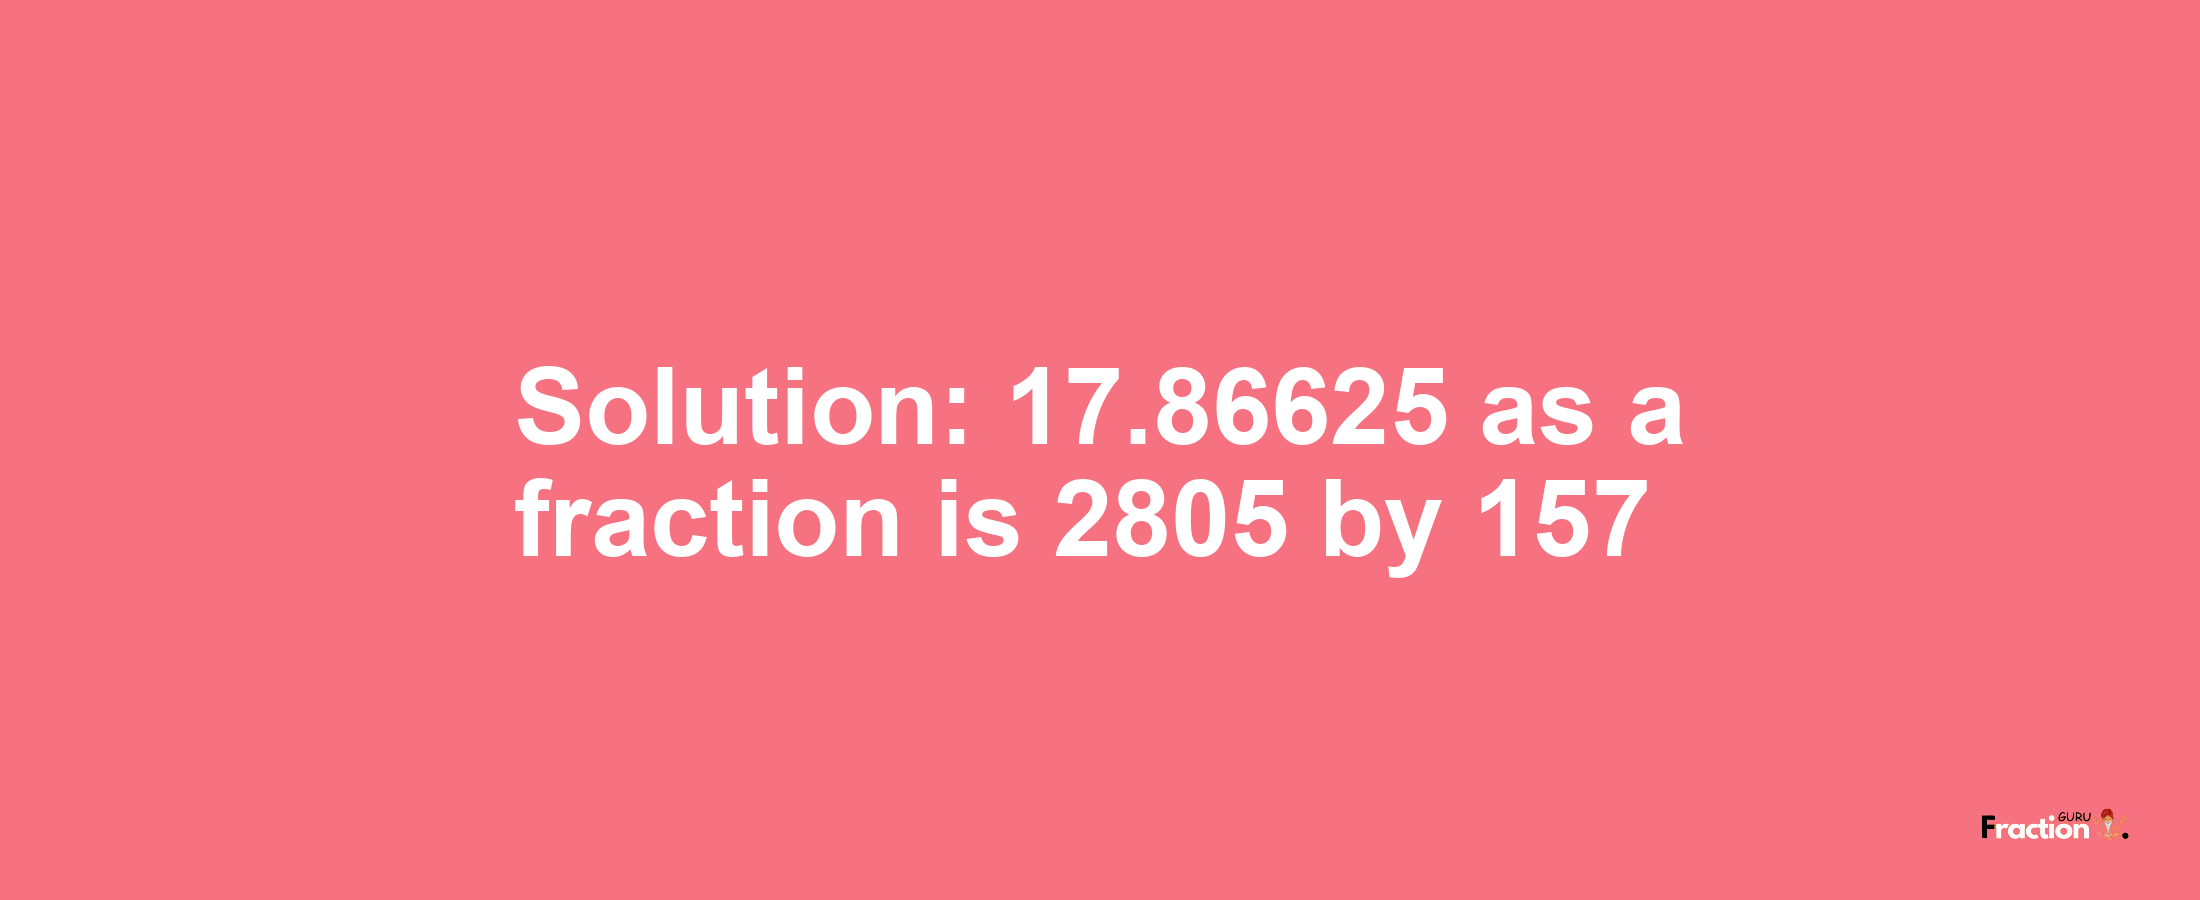 Solution:17.86625 as a fraction is 2805/157